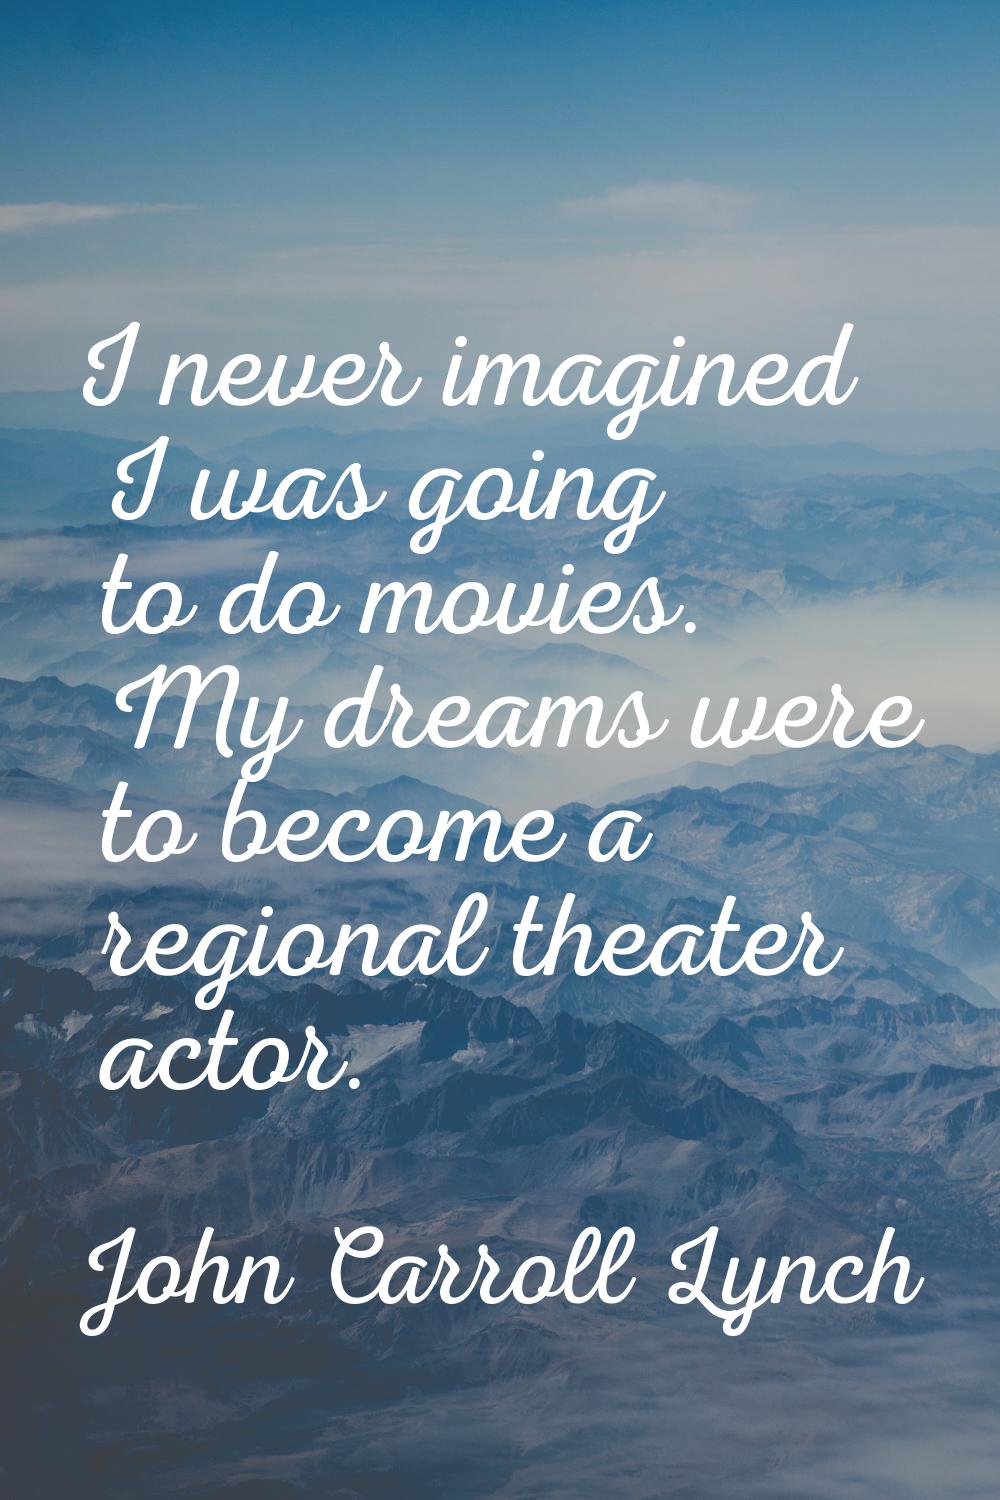 I never imagined I was going to do movies. My dreams were to become a regional theater actor.